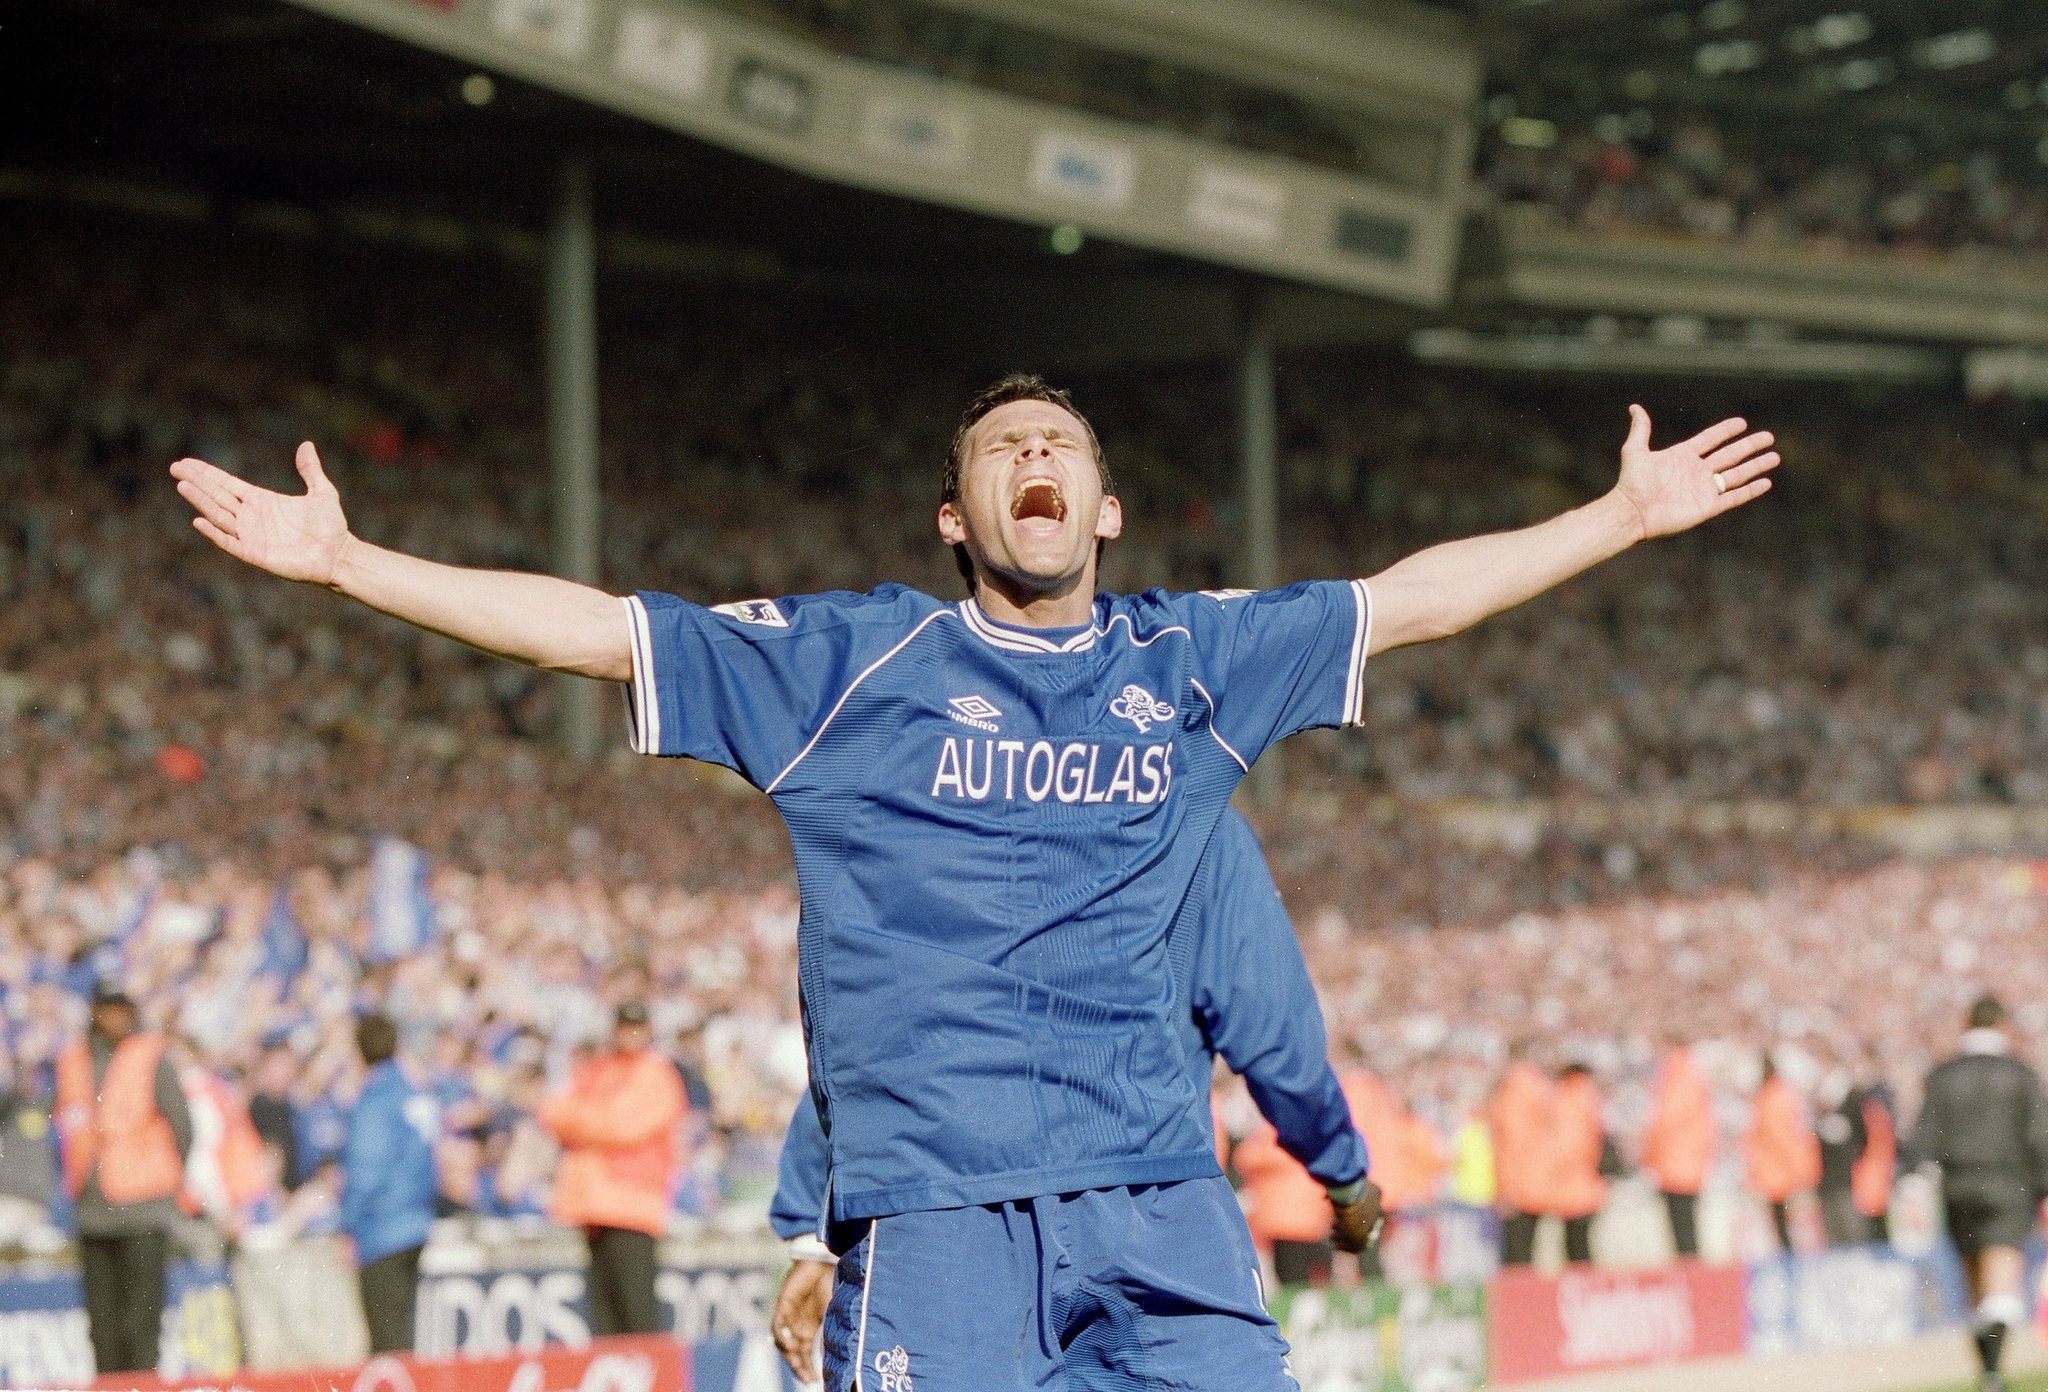  in 1967, former Spurs, Chelsea and Uruguay midfielder Gus Poyet was born.

Happy birthday, Gus! 